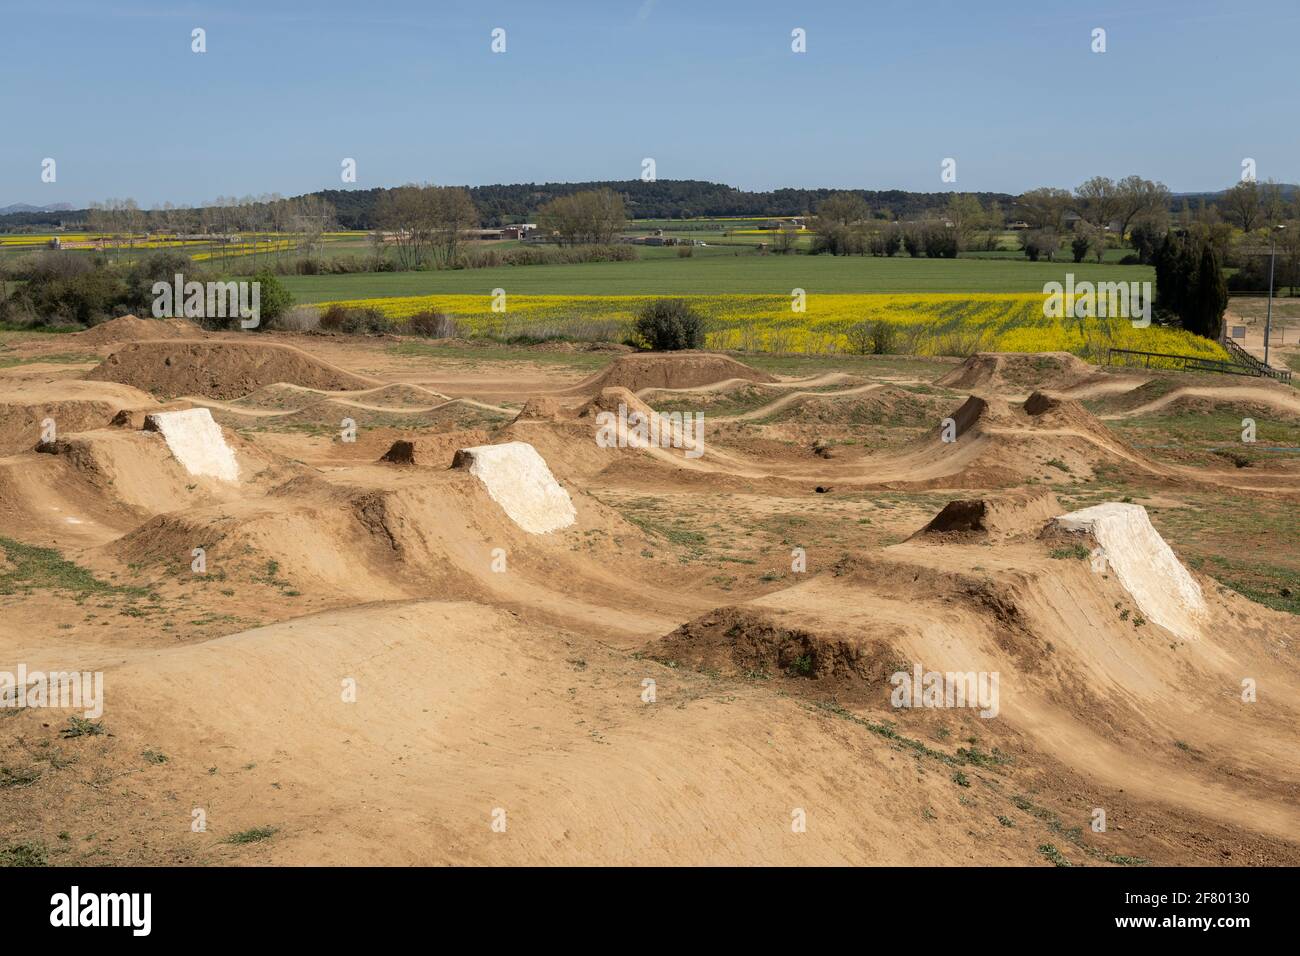 Bike park with dirt jumps in Forallac, Catalonia, Spain Stock Photo